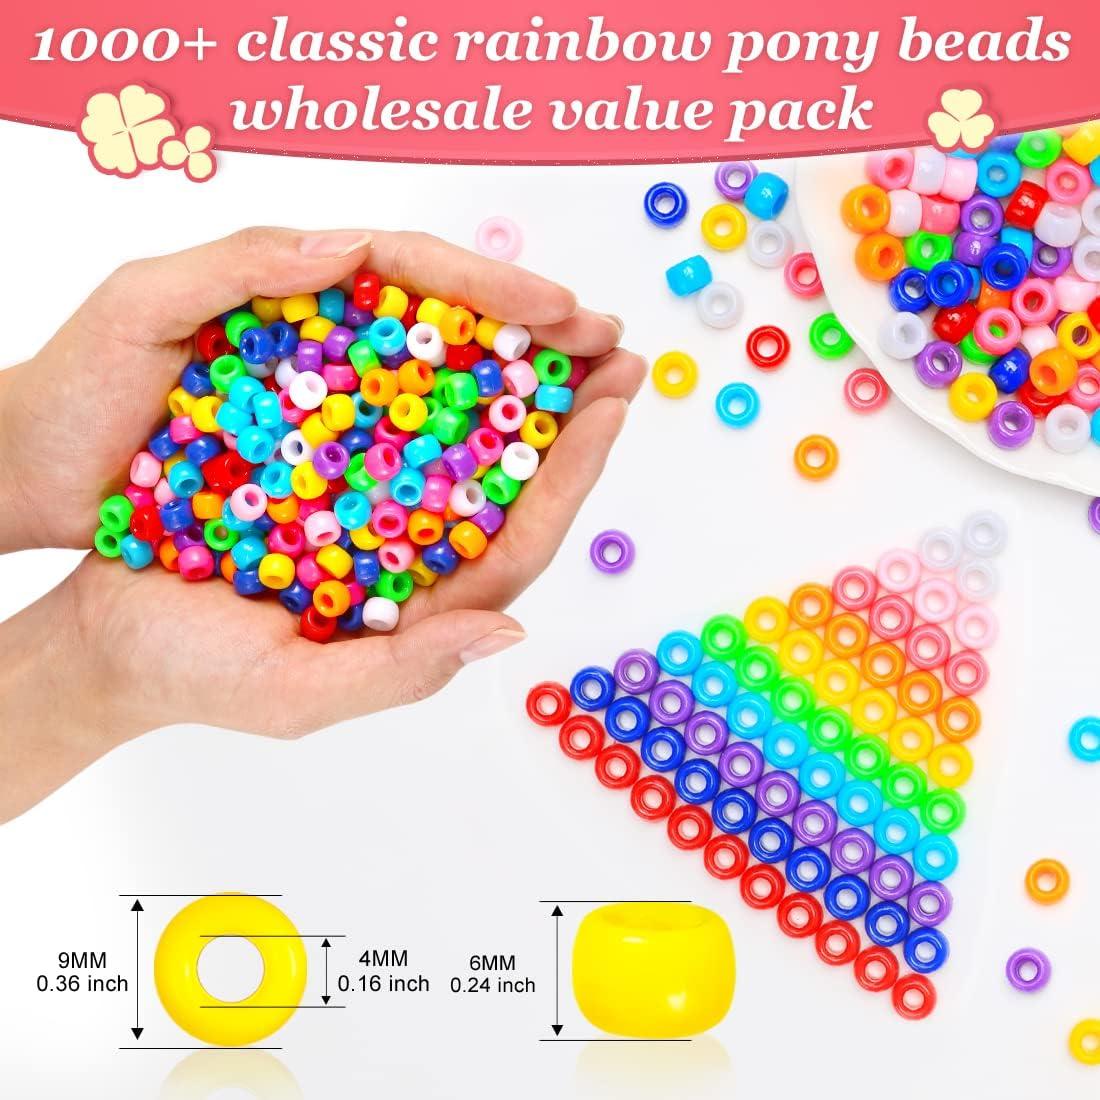 Eppingwin Pony Beads, Multi-Colored Bracelet Beads, Beads for Hair Braids,  Beads for Crafts, Plastic Beads, Hair Beads for Braids (Small P